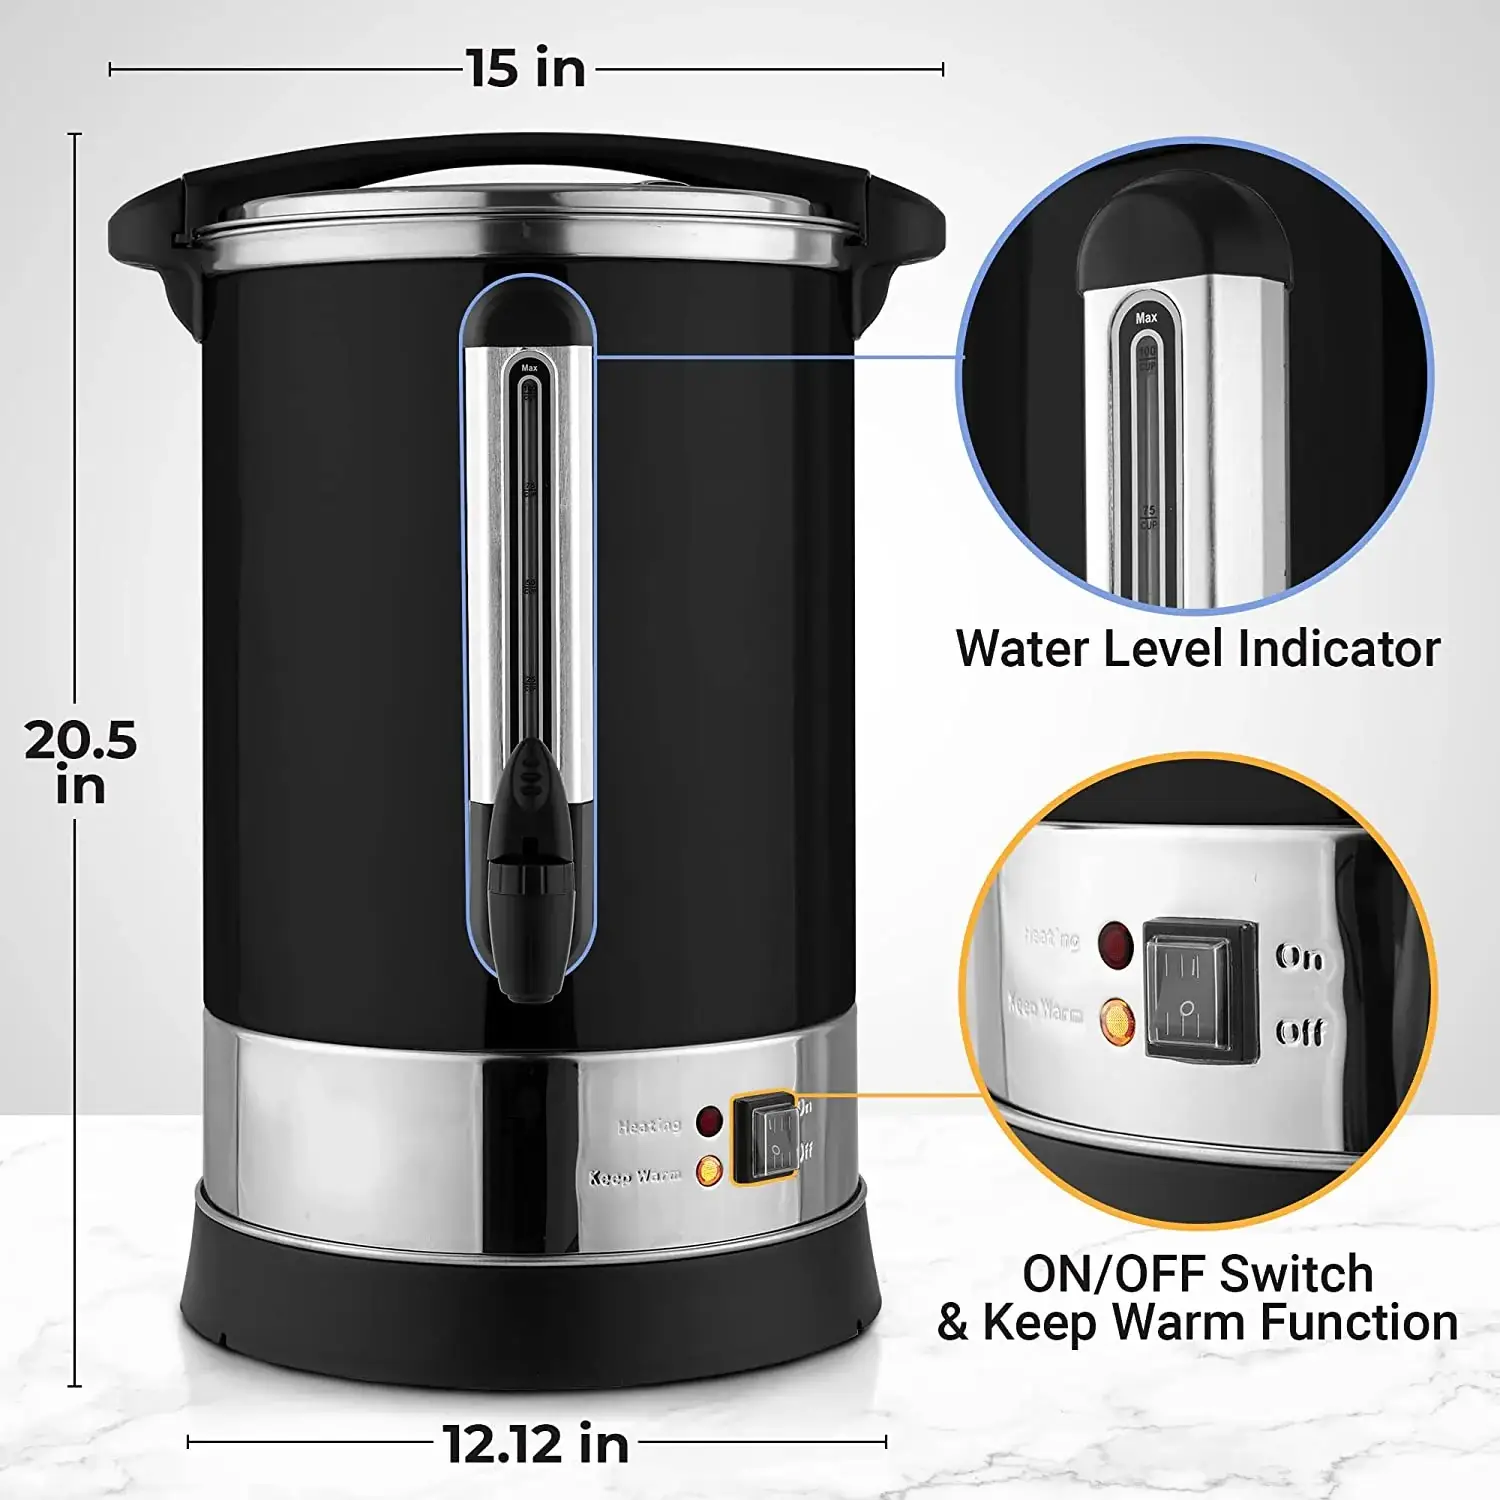 Premium 100 Cup Commercial Coffee Urn Automatic Hot Water Dispenser - Ideal for Large Crowds